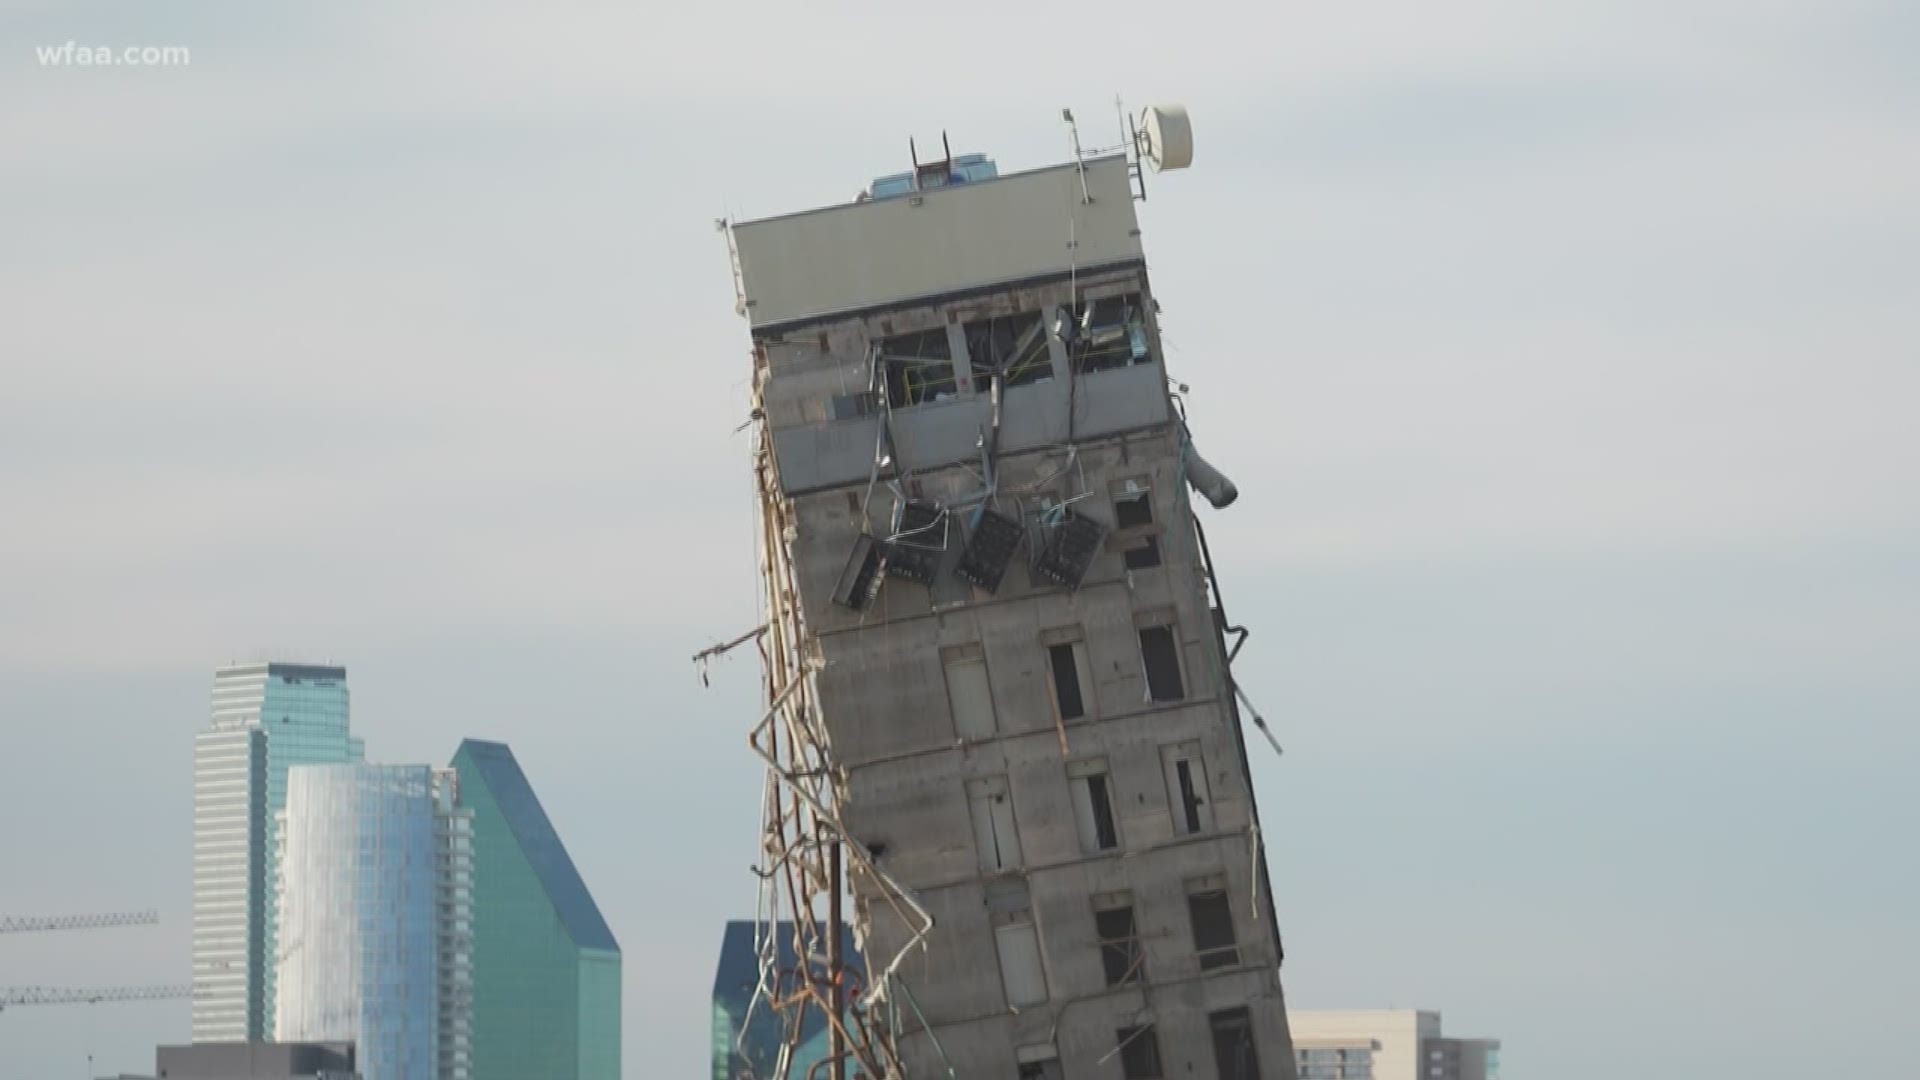 A wrecking ball crew started demolition on the tower Monday morning.